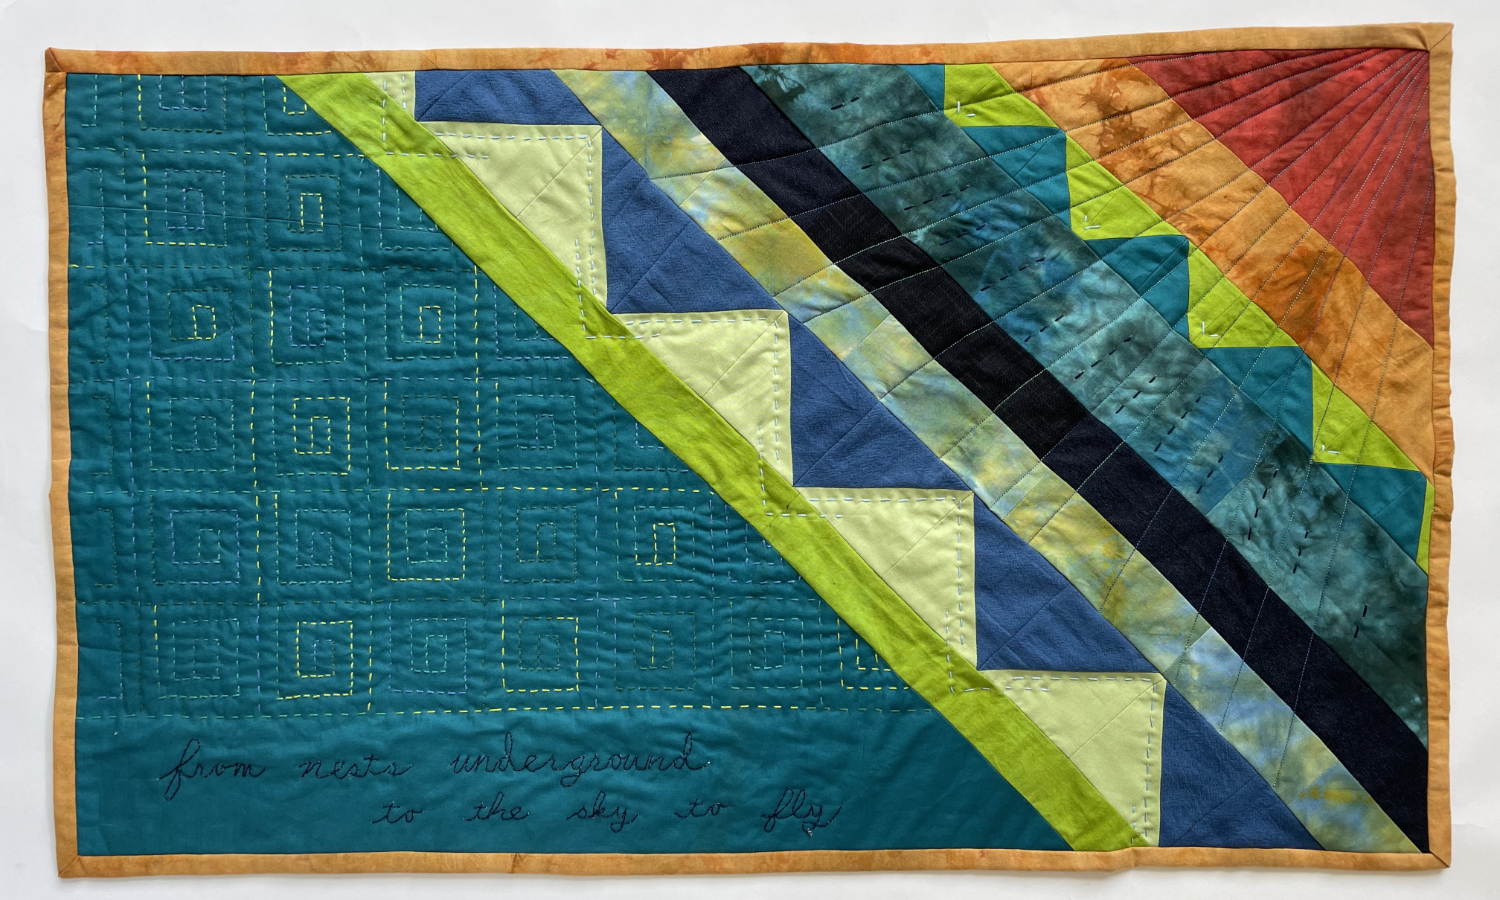 pieced quilt with bird tail at upper right like a sunburst and text that says from nests in the ground to the sky to fly